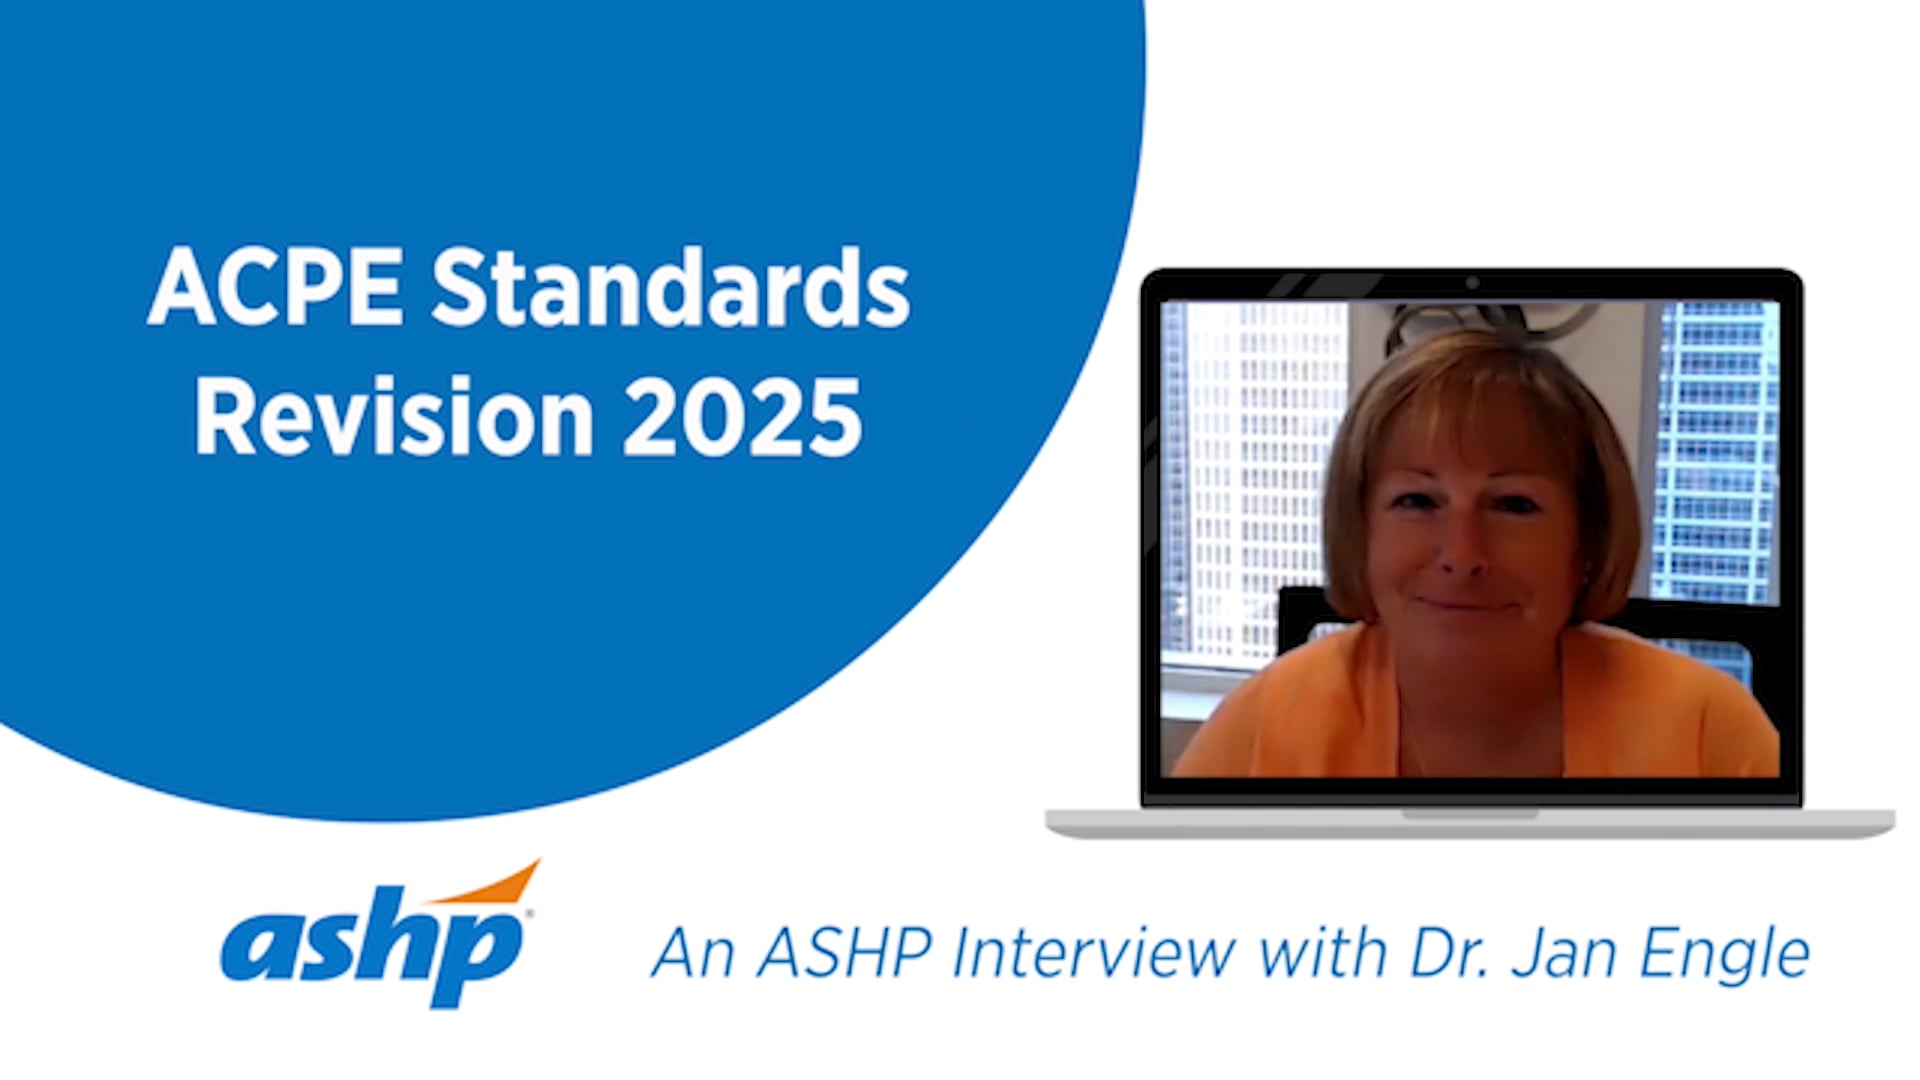 ACPE 2025 Standards Revision An ASHP Interview with Jan Engle on Vimeo